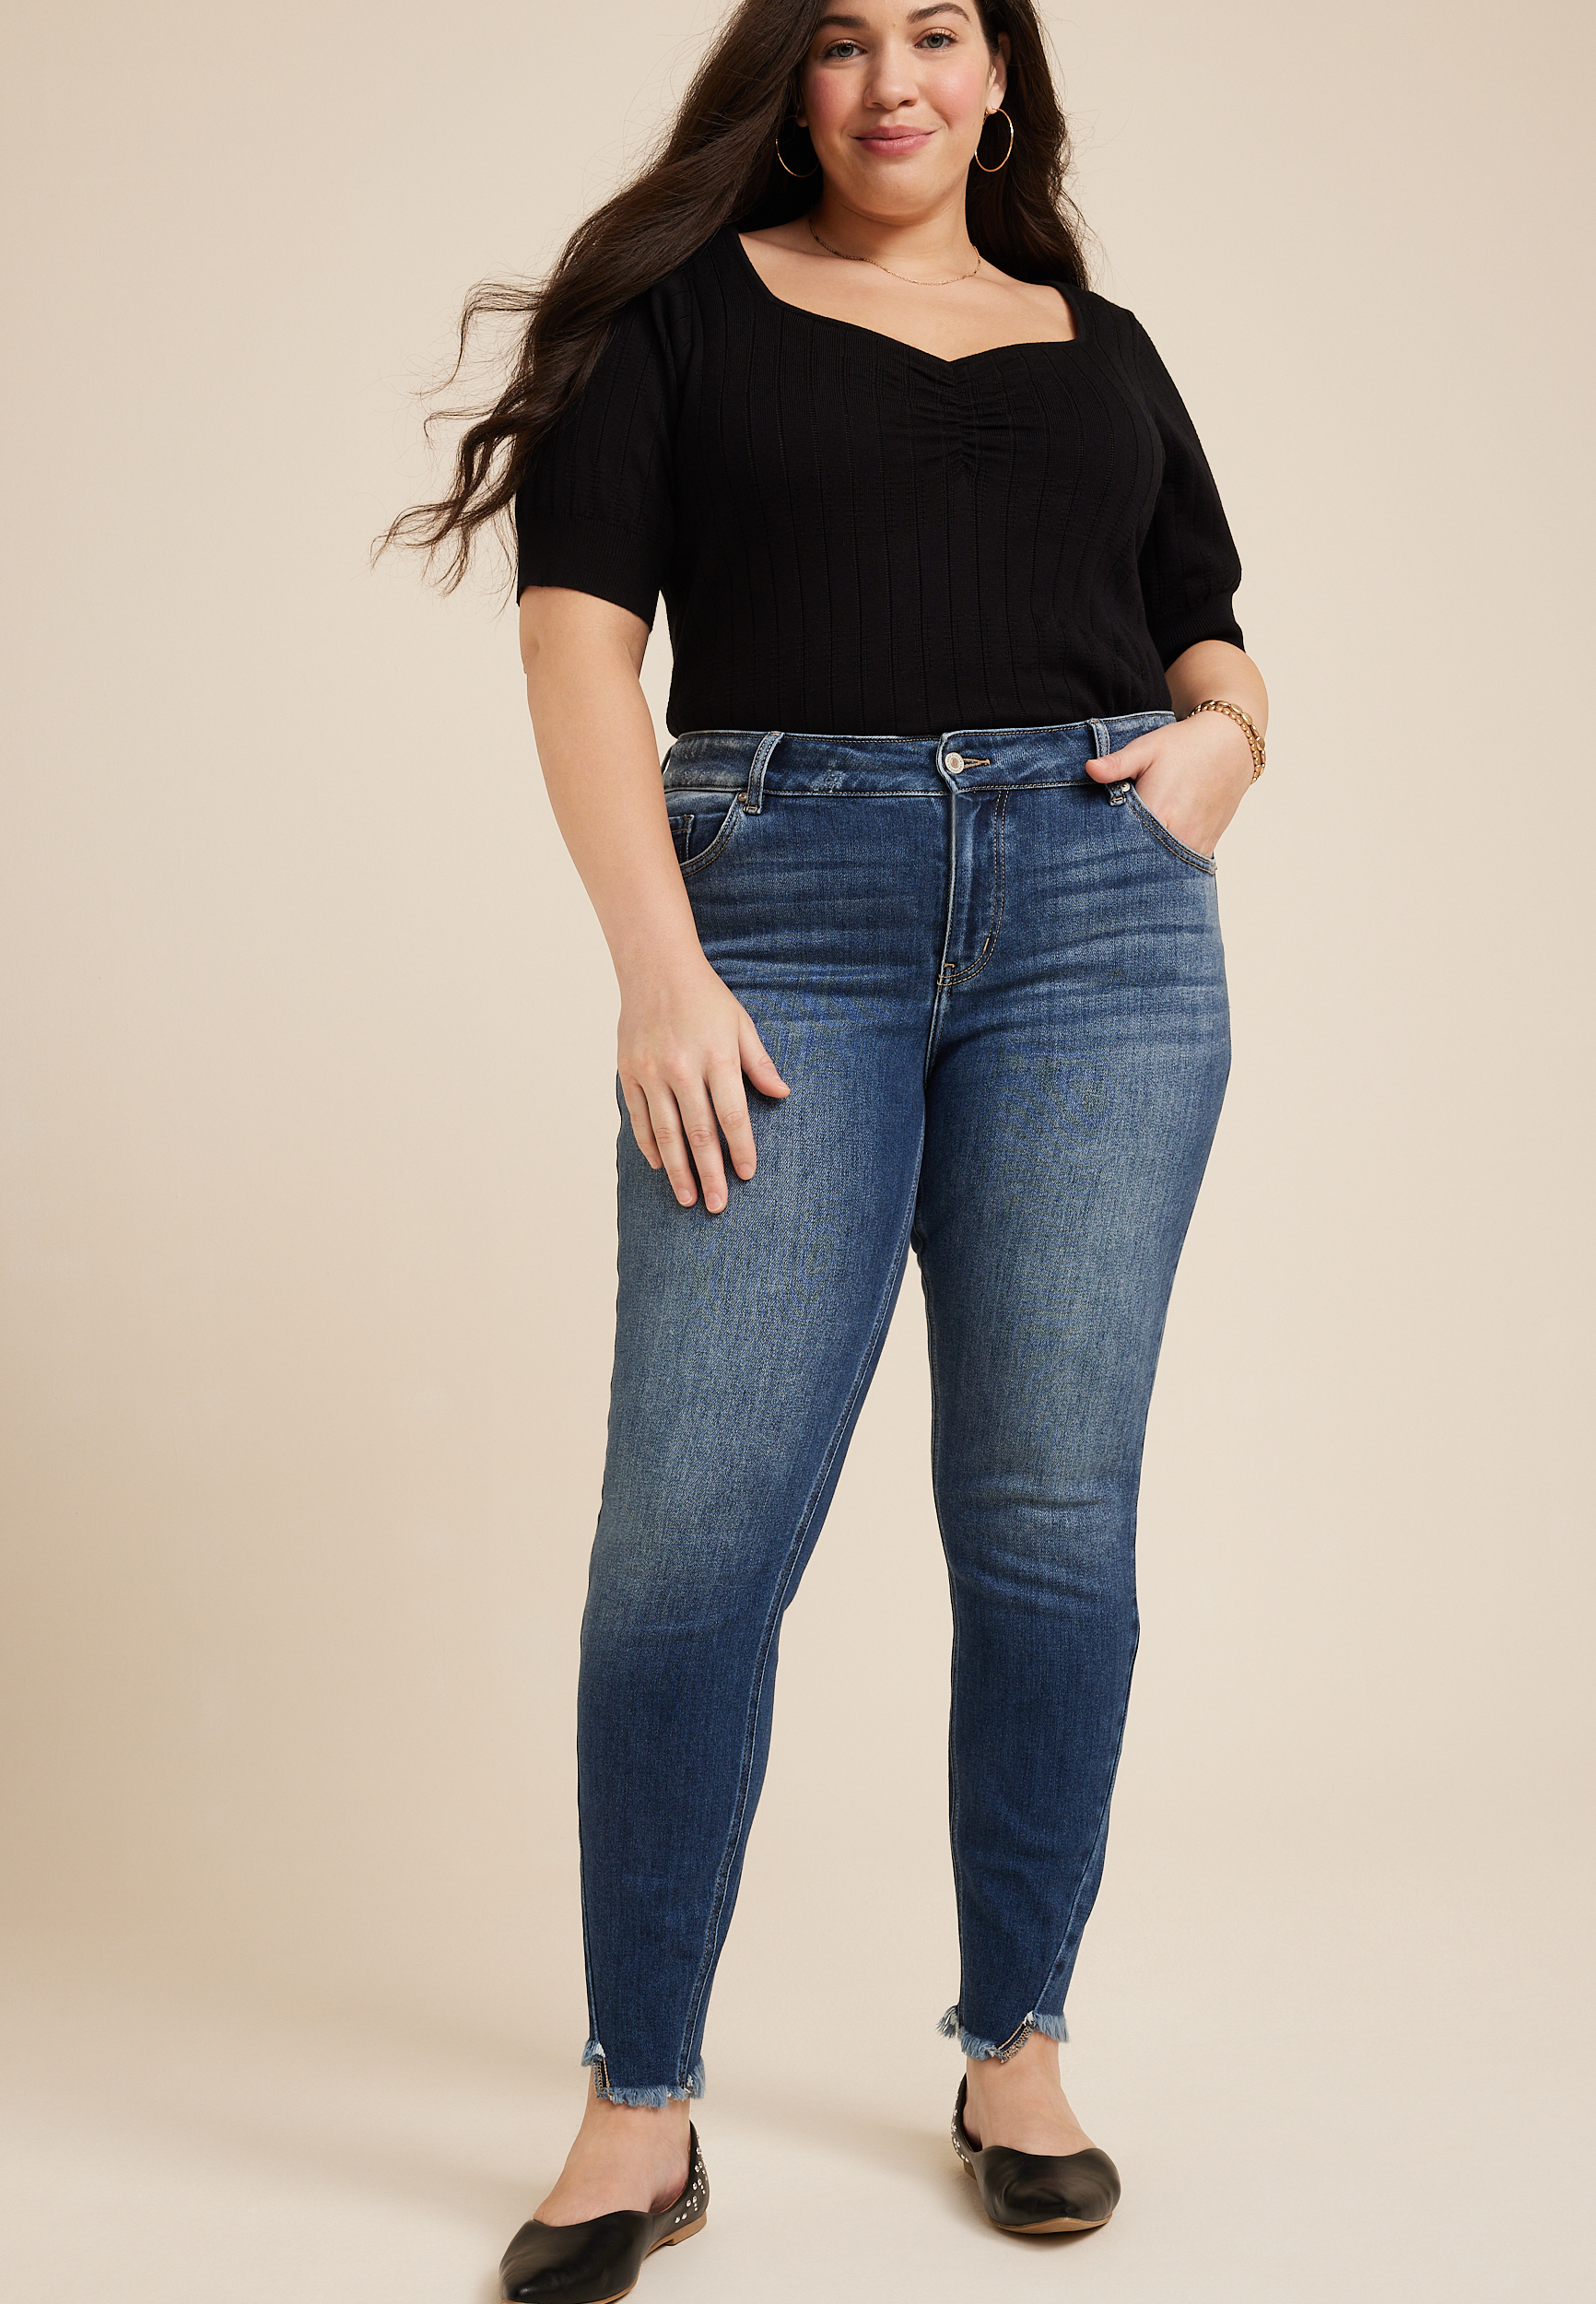 WIPLORE Jean Look Jeggings for Women Plus Size High Waist Stretch Denim  Leggings with Pockets Skinny Pull On Pants 1X-4X, 01_black, XL price in UAE,  UAE